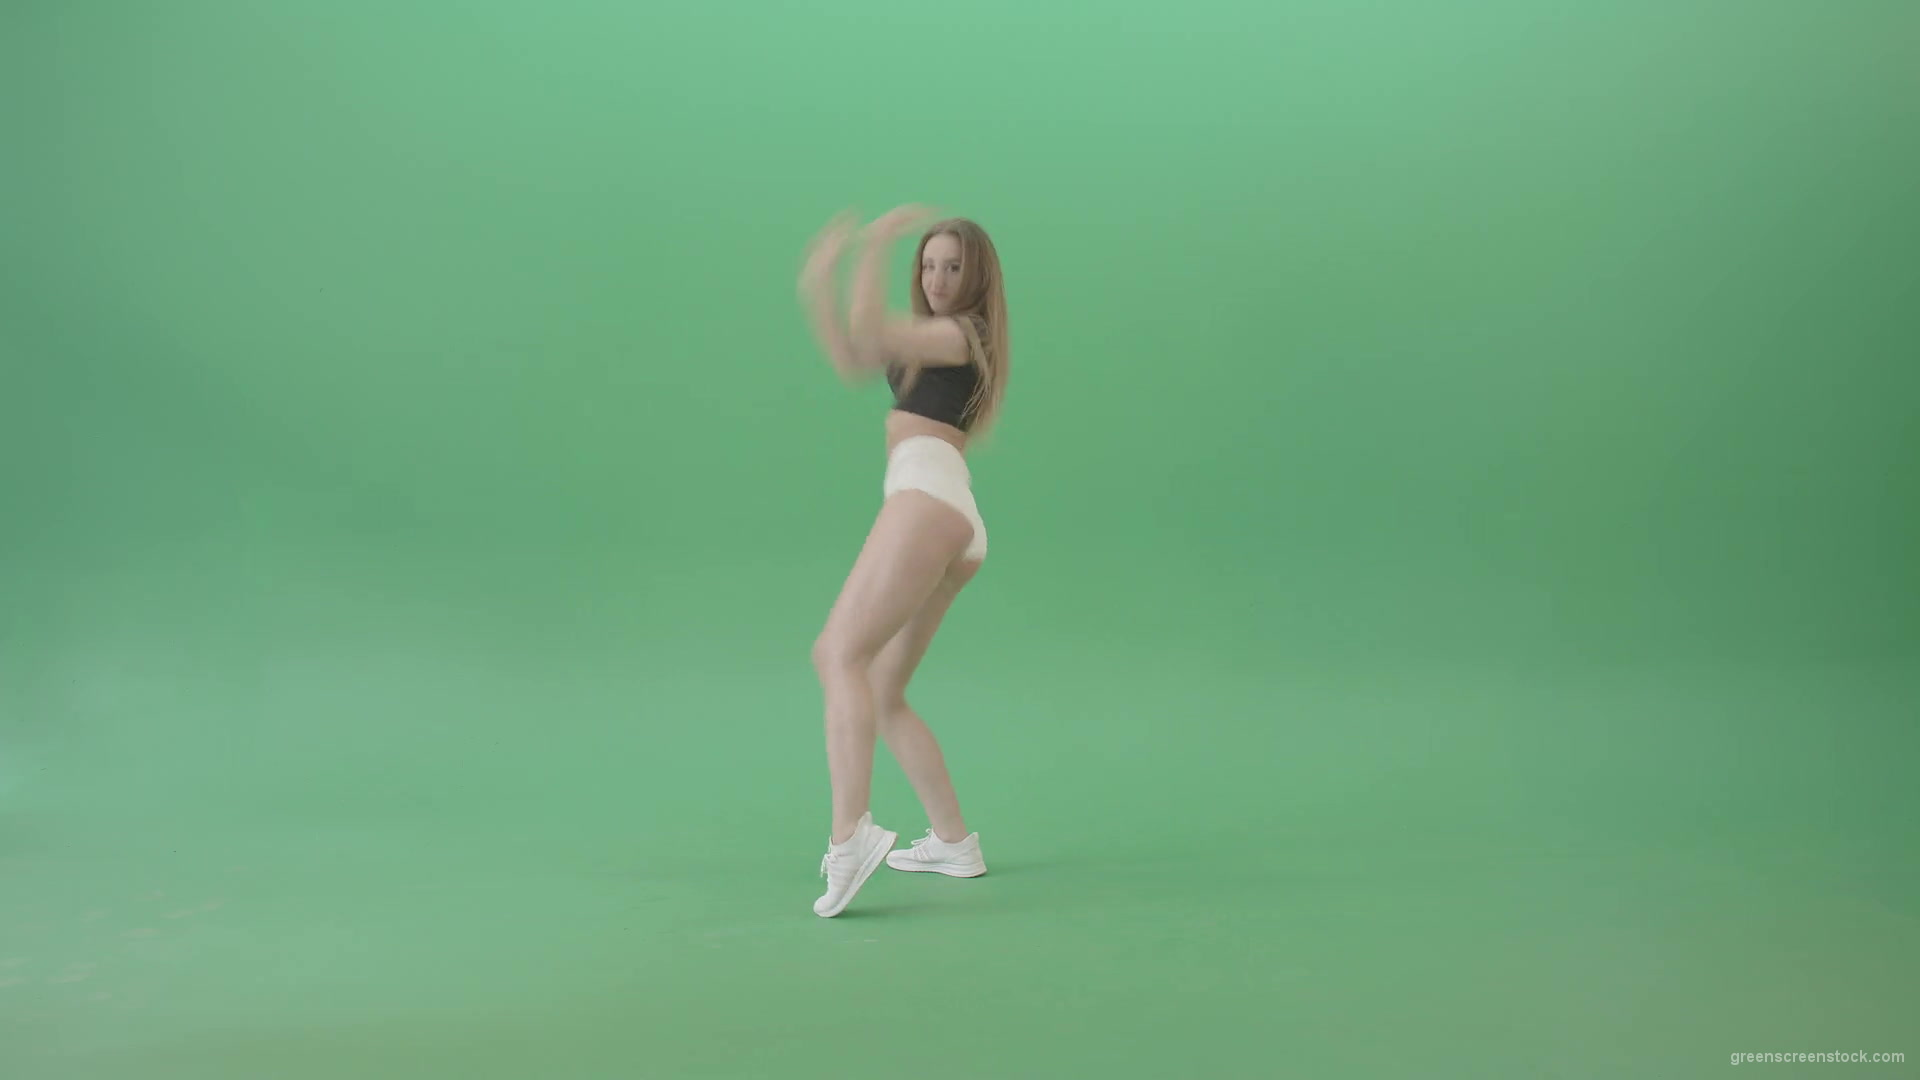 Beauty-girl-sрaking-ass-and-hips-dancing-Twerk-Afro-Dance-isolated-on-green-screen-4K-Video-Footage-1920_002 Green Screen Stock